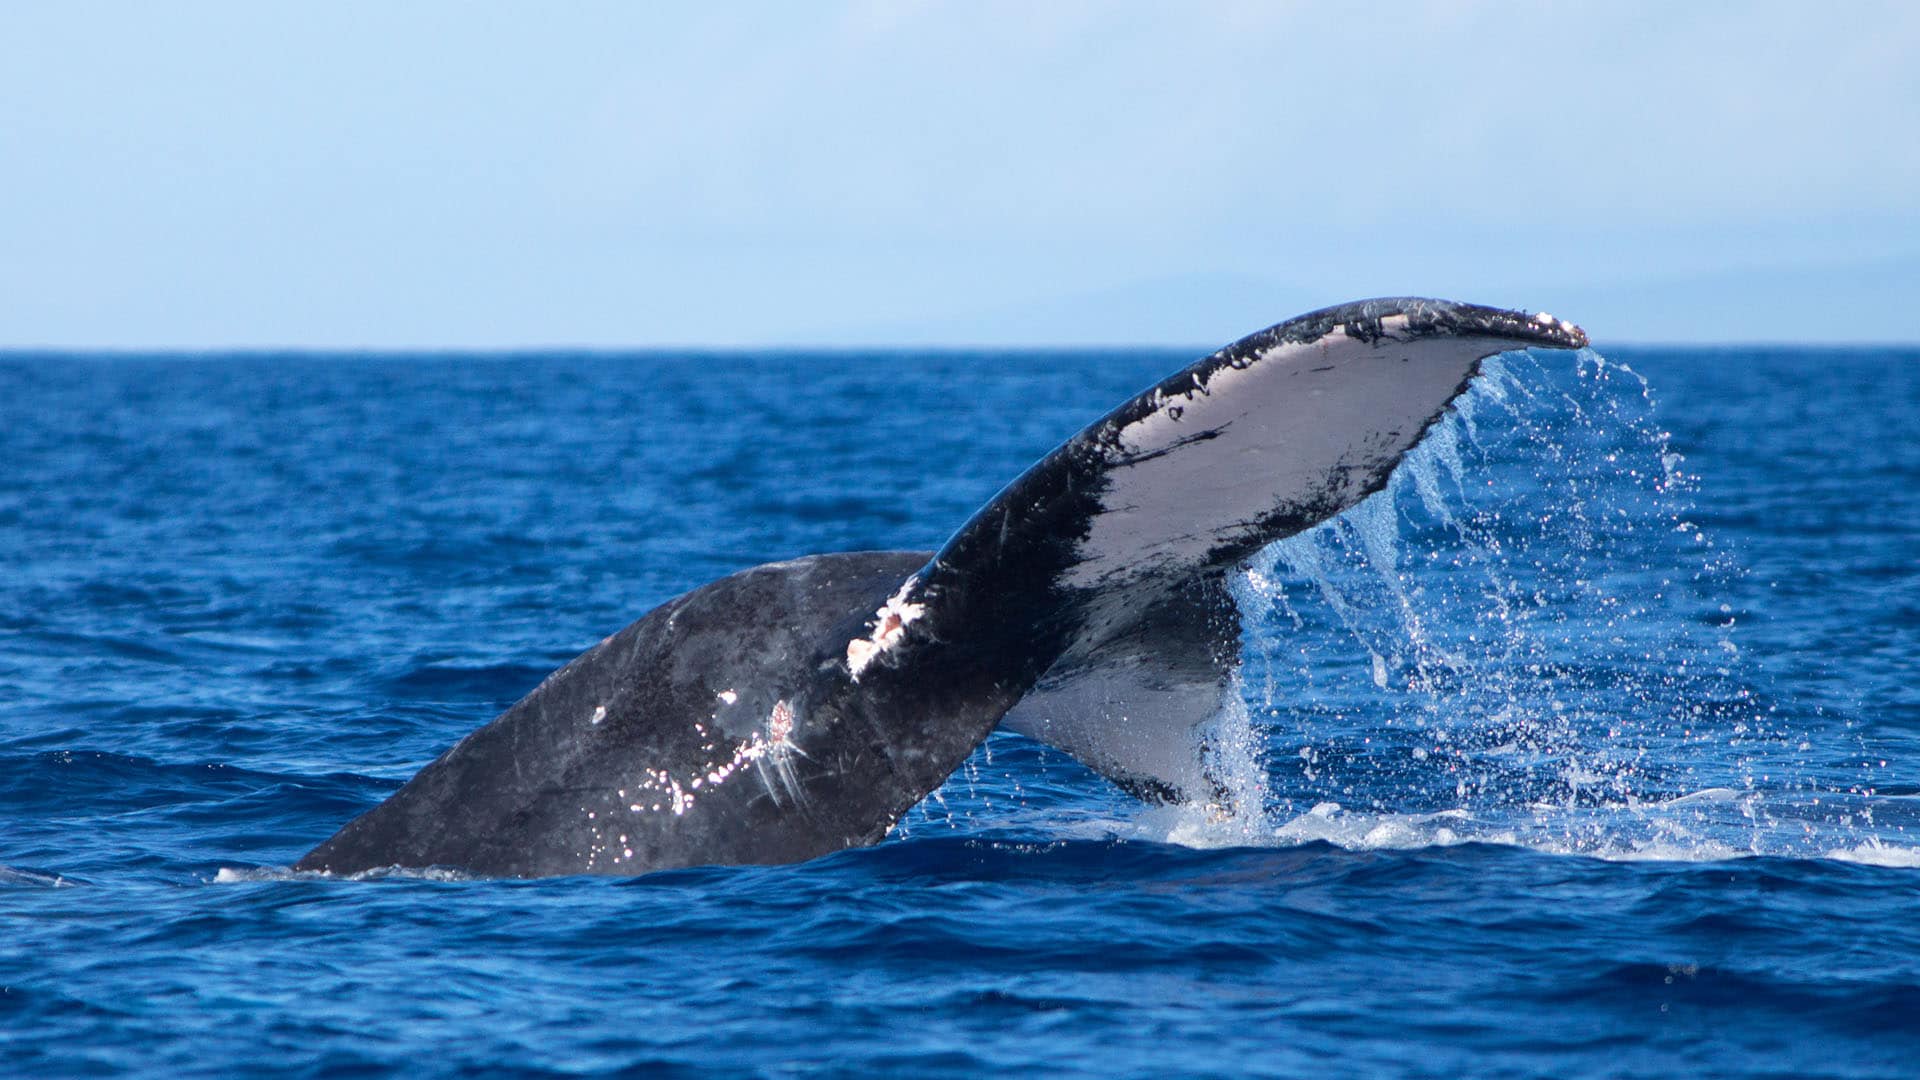 Off the coast of Maui, Hawaii, a humpback whale slaps the water with its broad tail.